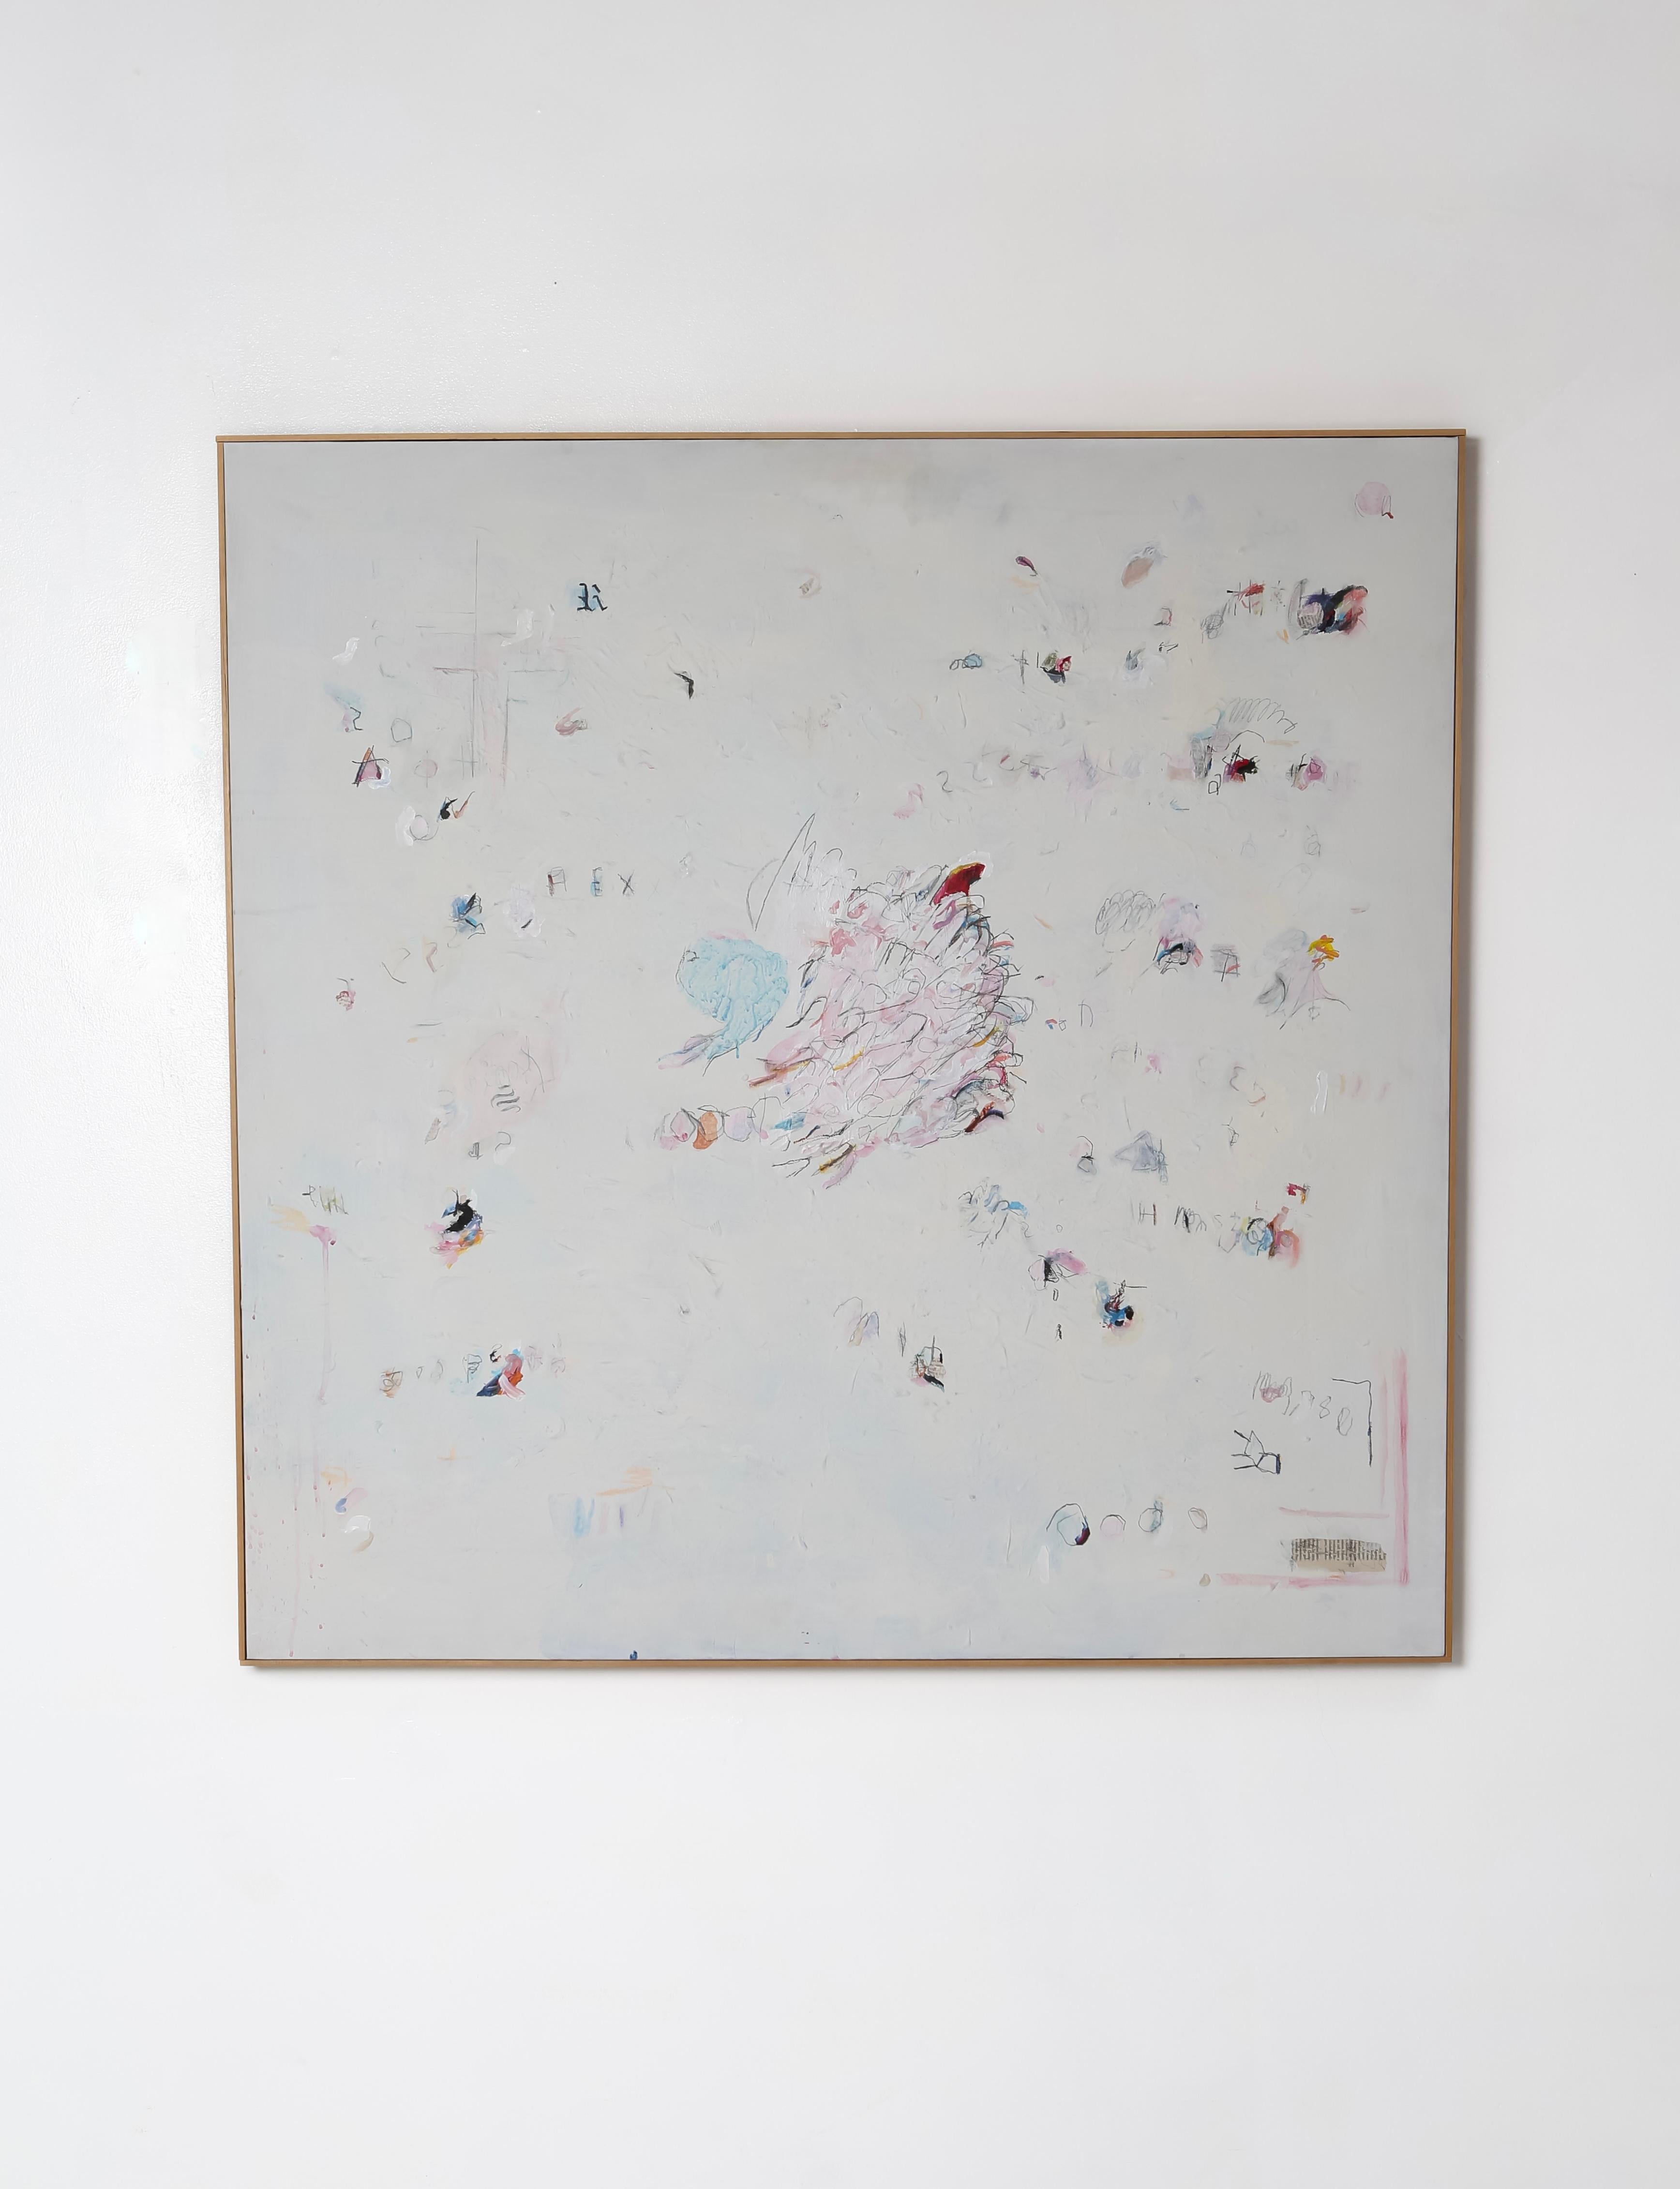 Large scale abstract expressionist work by Charlie Salas-Humara. A Portland, Oregon artist, Charlie explores meaning amidst chaos. The paintings are ethereal; some themes exist but there is a sense of of humor about this work- a playful chaos. This